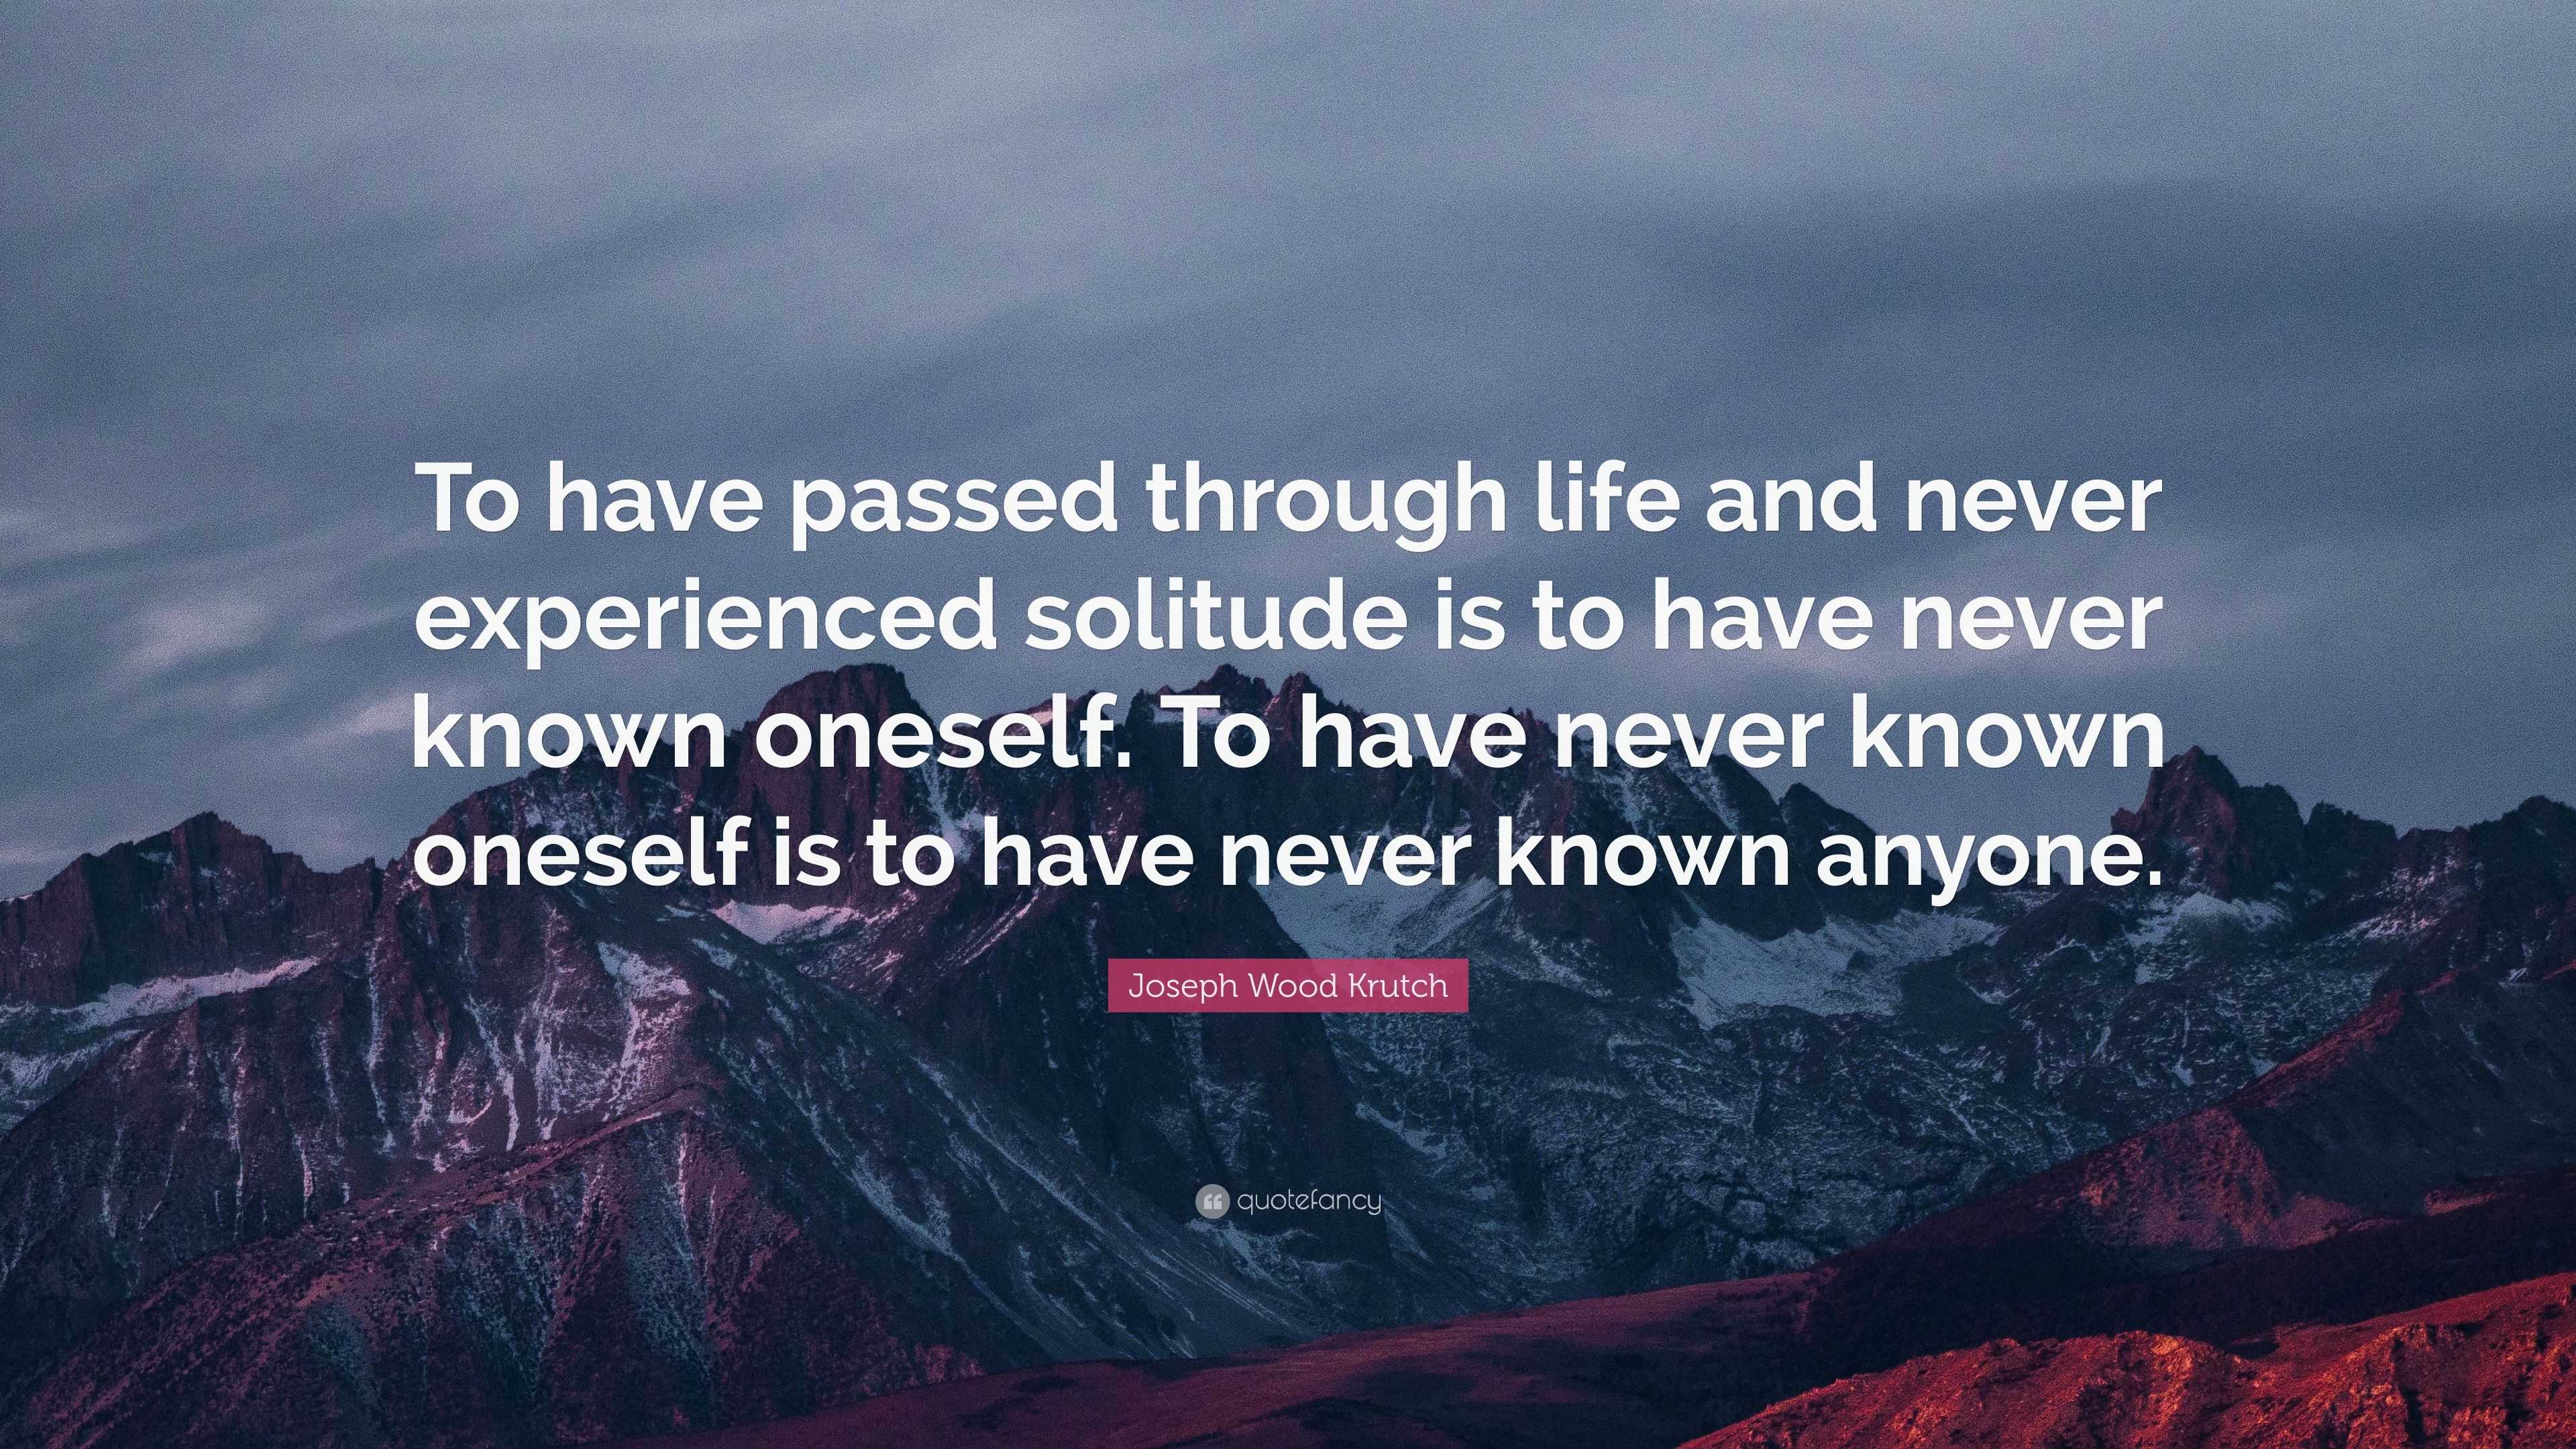 Joseph Wood Krutch Quote: “To have passed through life and never ...